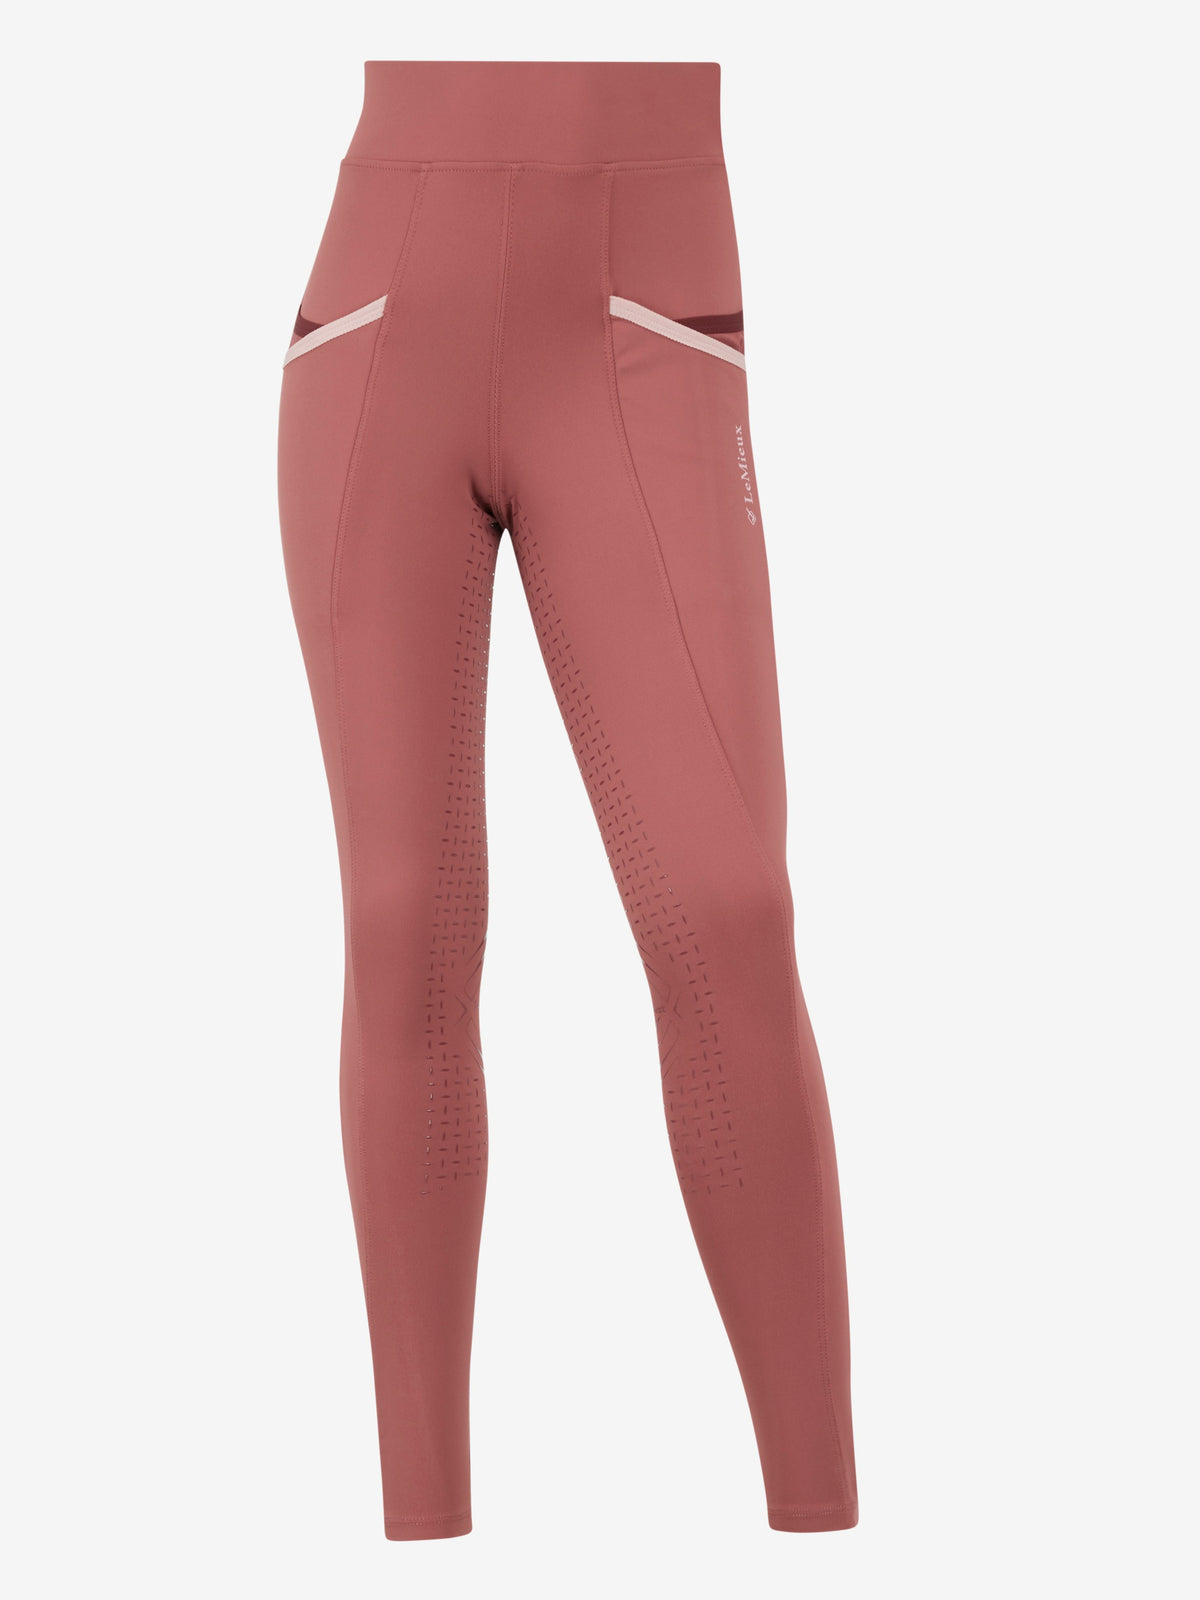 LeMieux riding tights (summer pull-on breeches) review